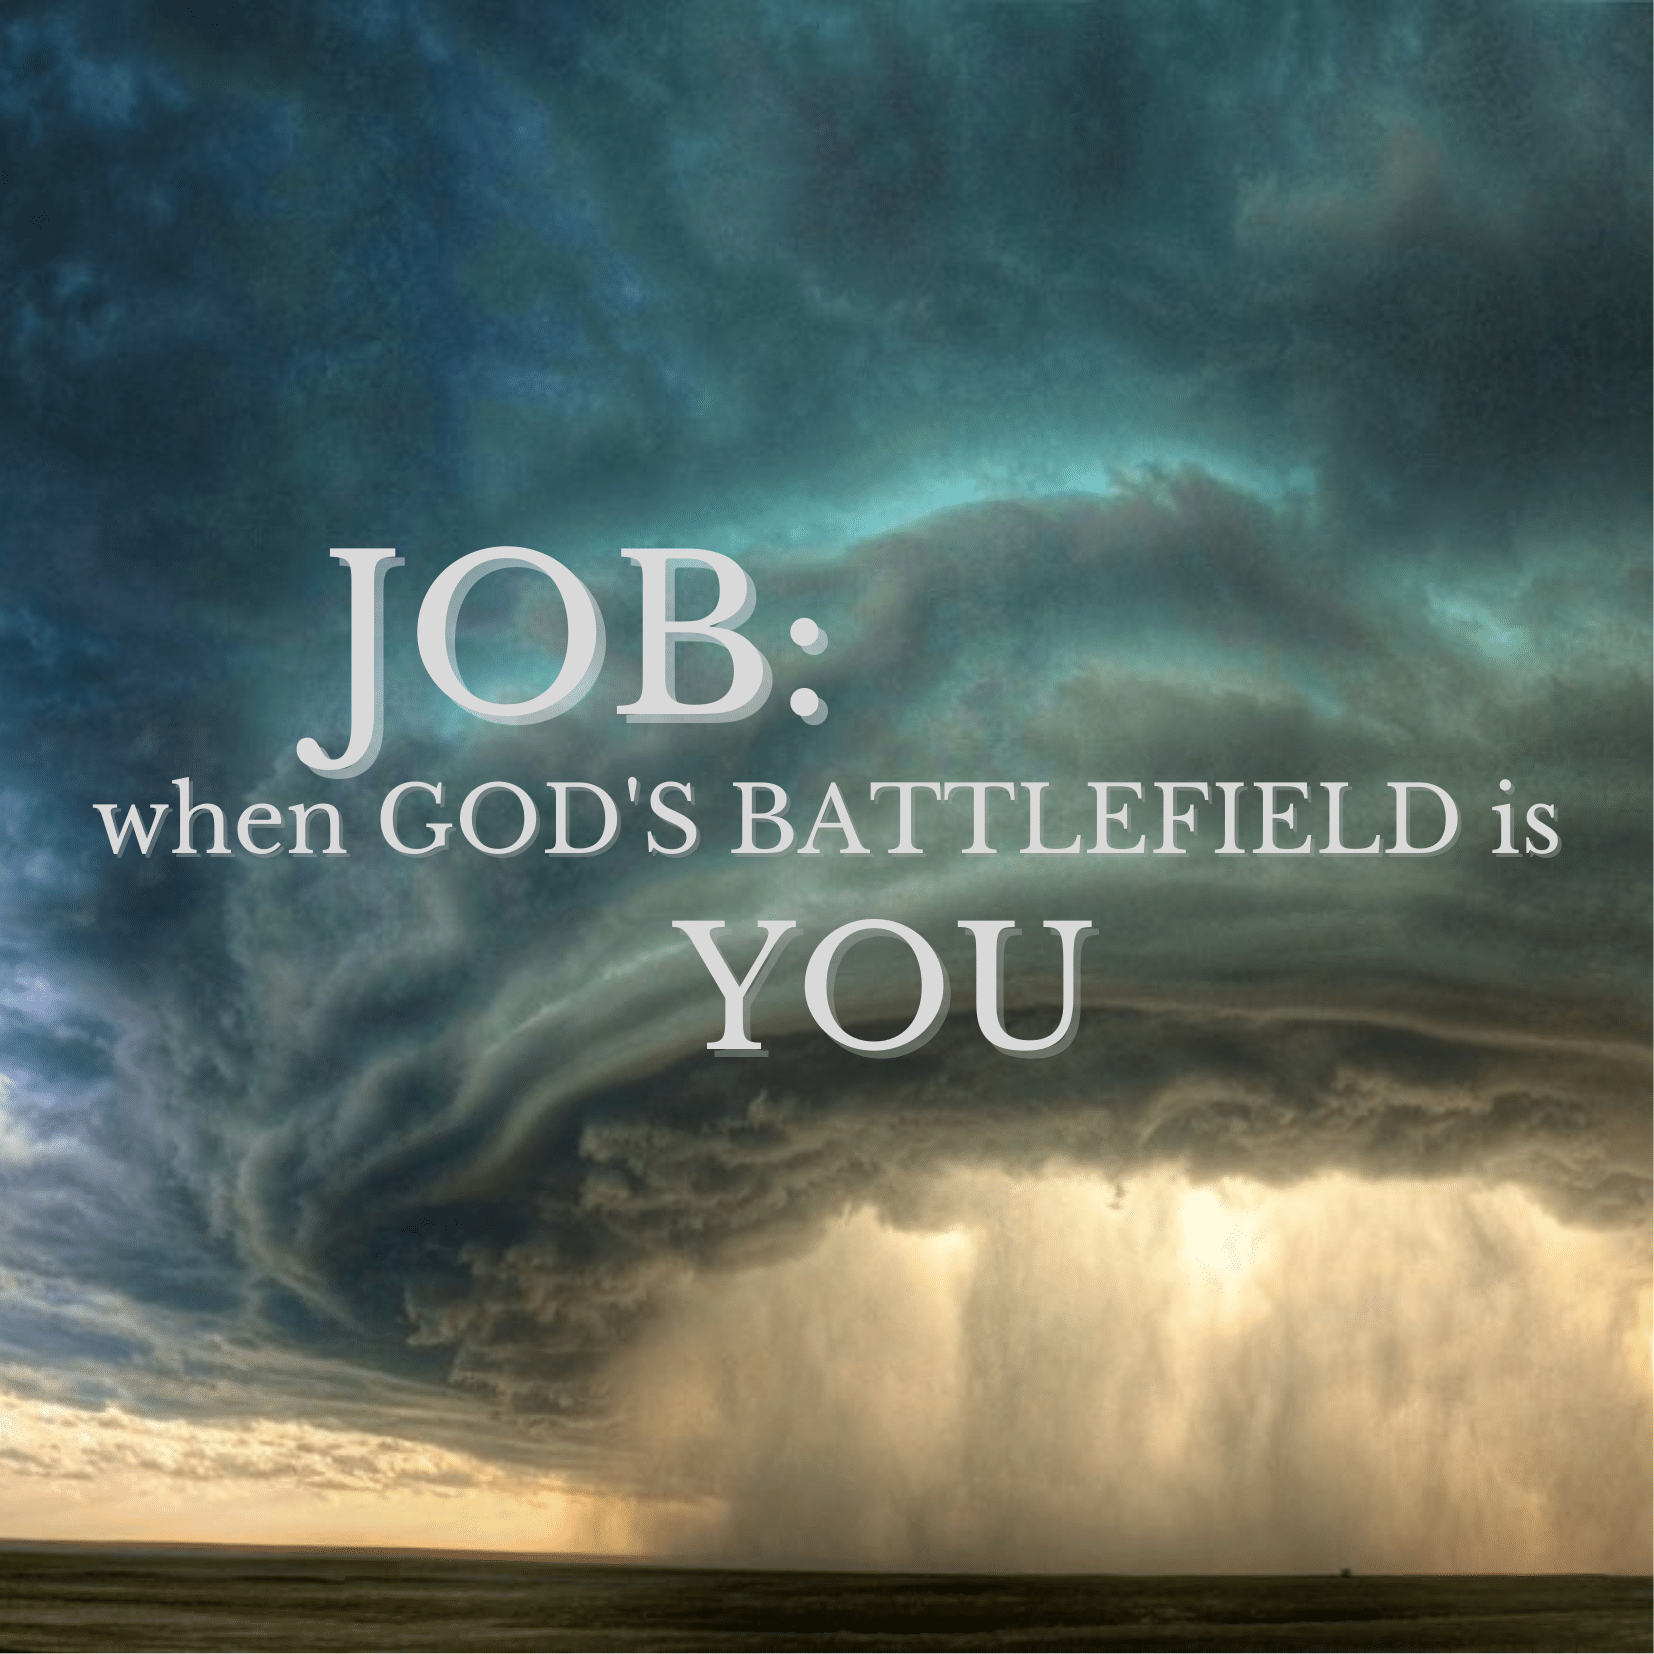 Job’s Wife: The Folly of Demanding God’s Gifts